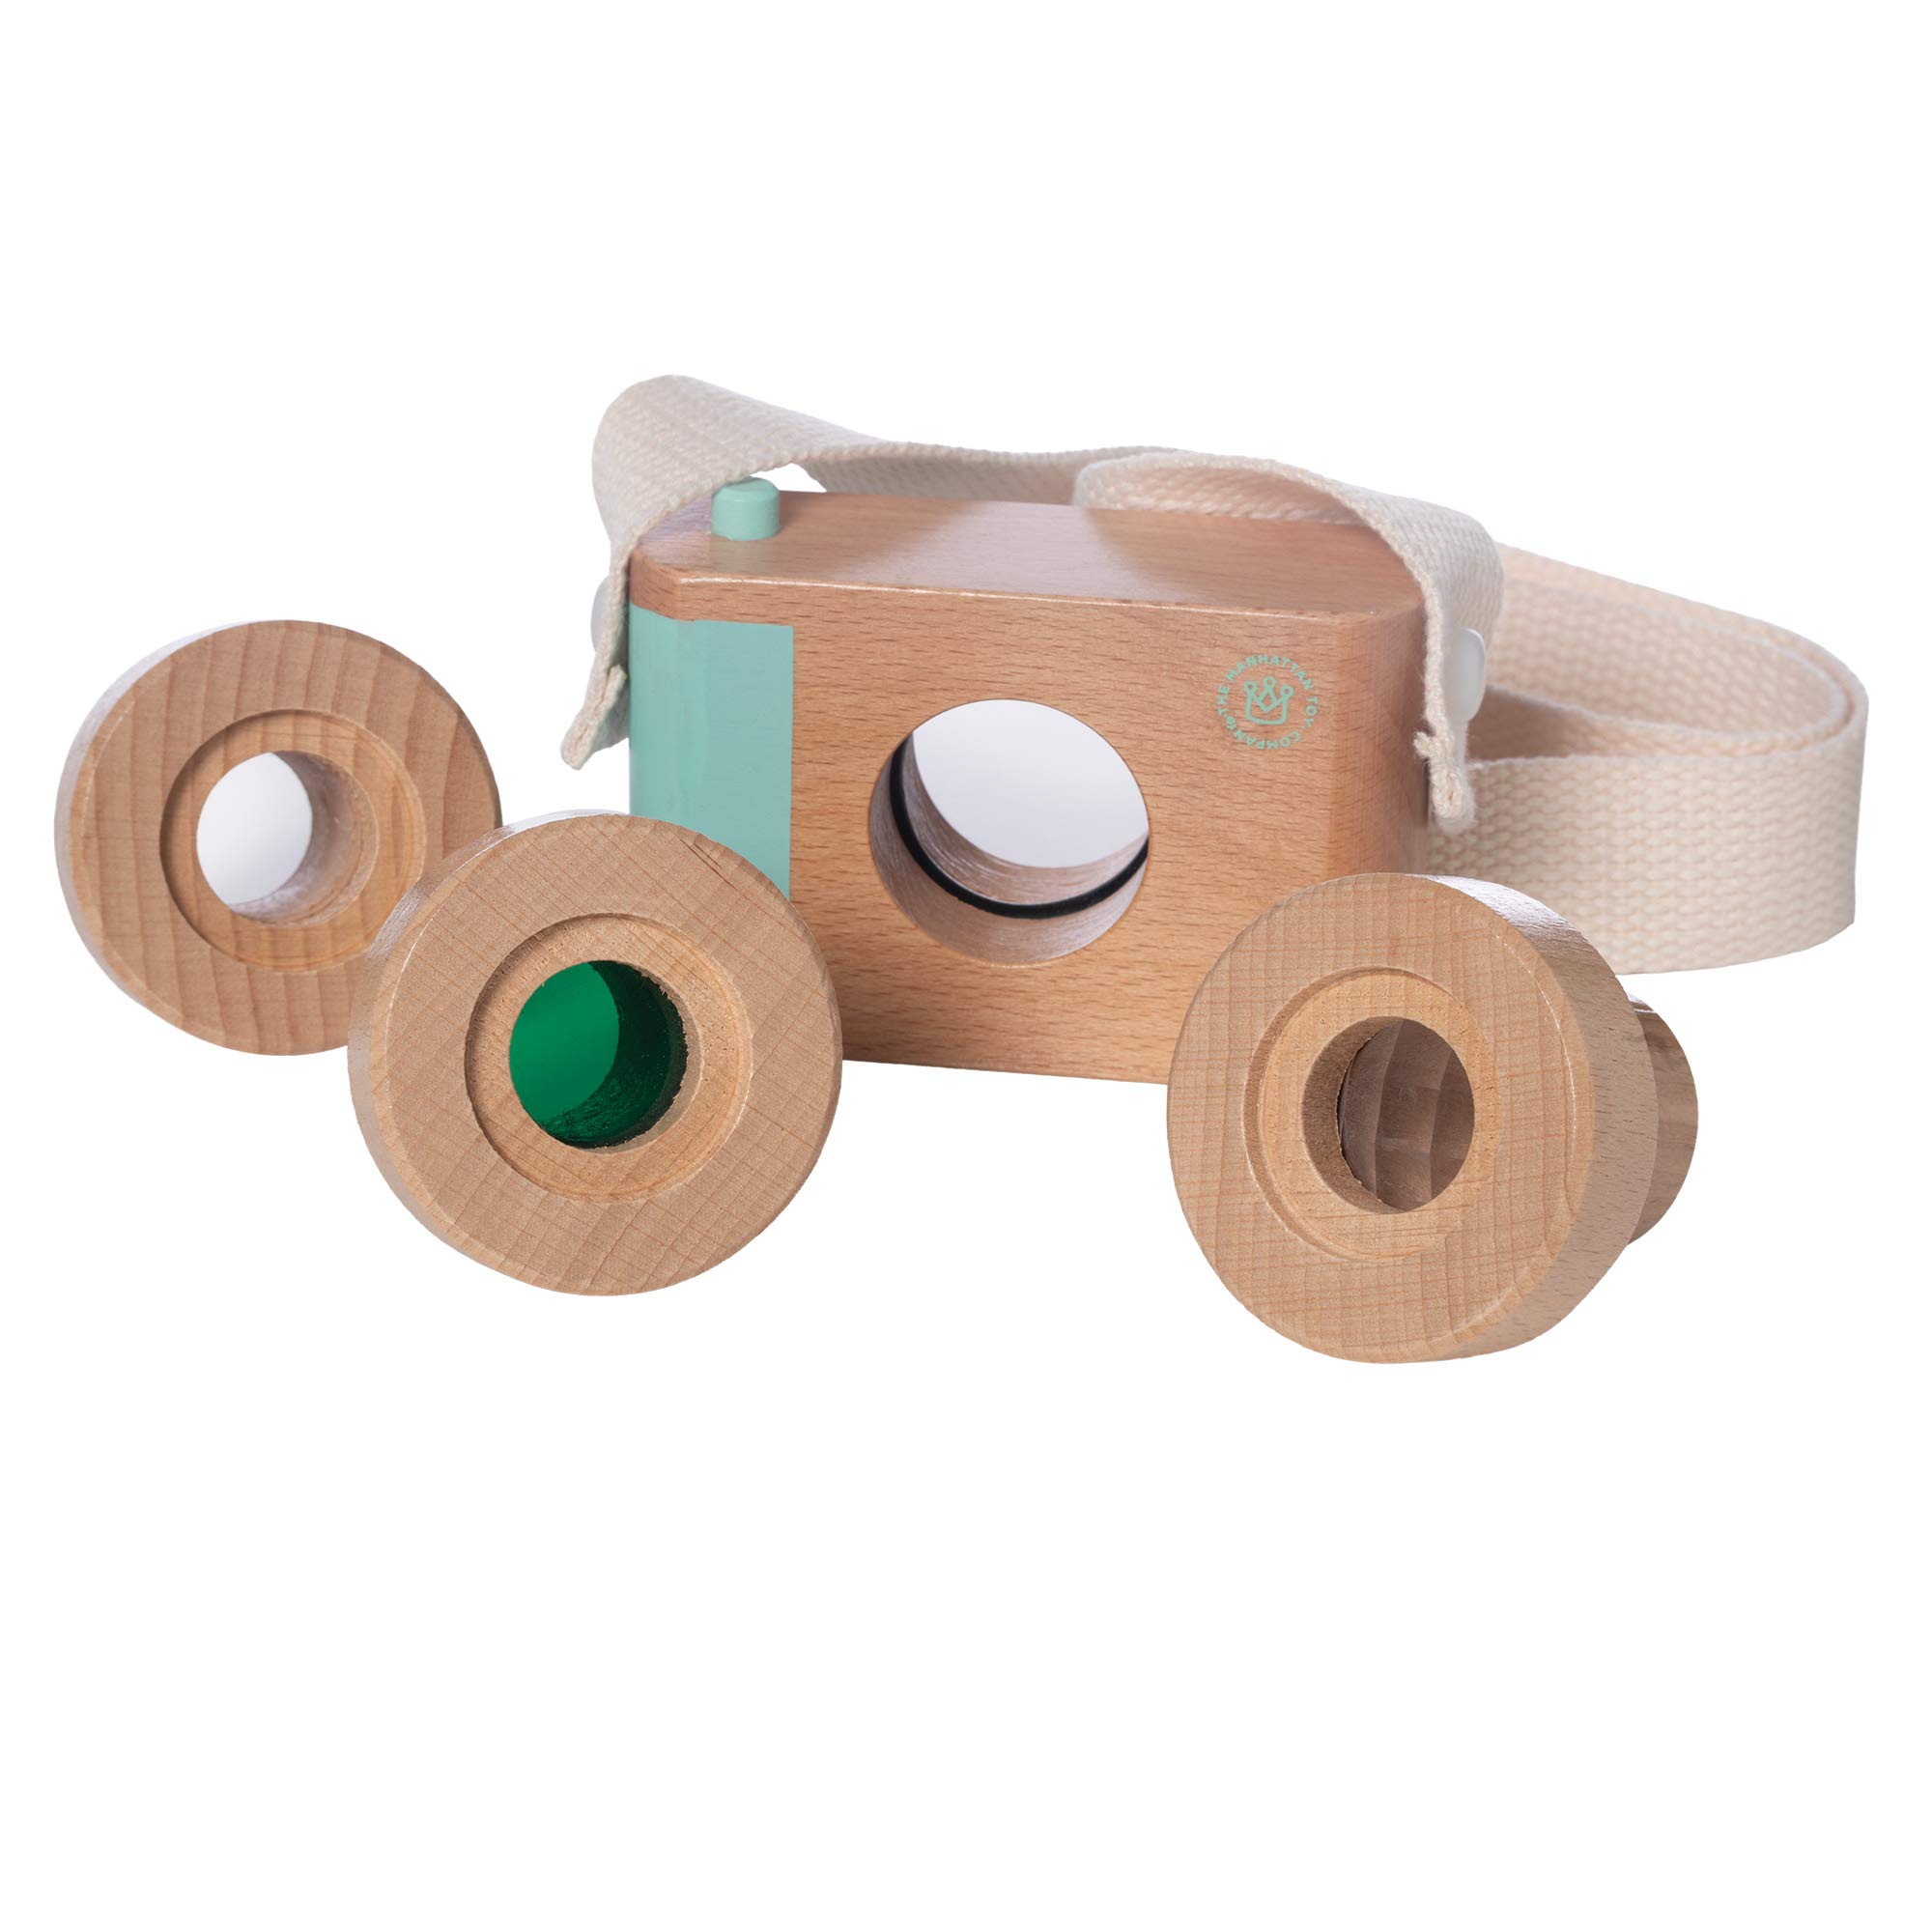 Manhattan Toy Natural Historian Wooden Camera Pretend Time Play with Clear, Green & Kaleidoscope Lenses